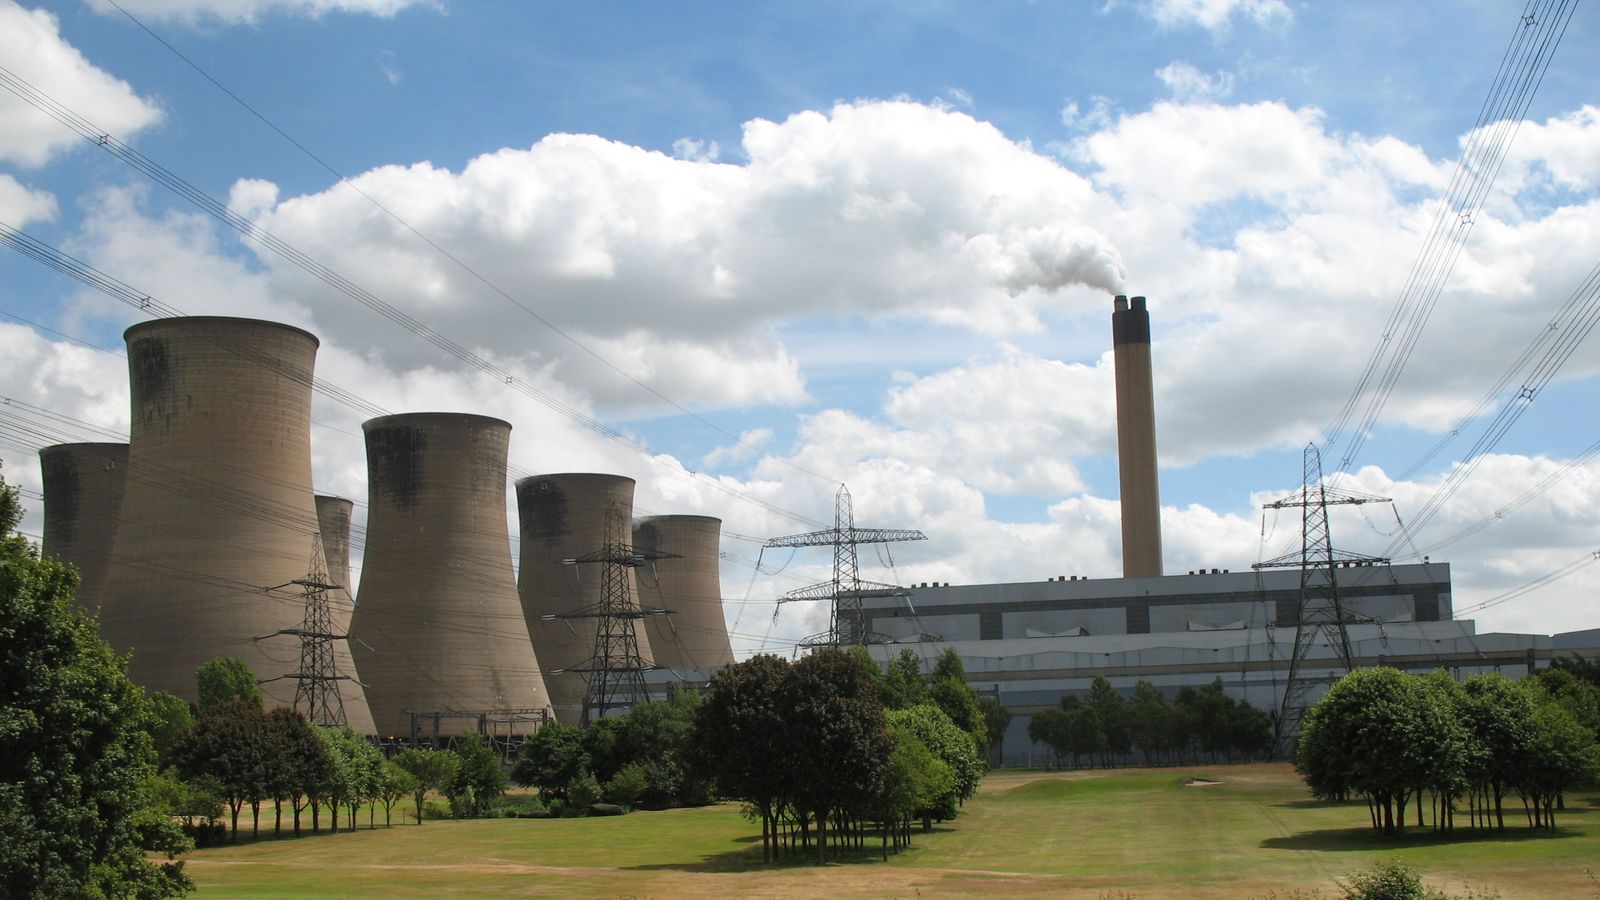 Image shows a large coal fired power station. On the left a group of concrete cooling towers, on the right a large flat roofed building with a tall chimney rising from its centre section.